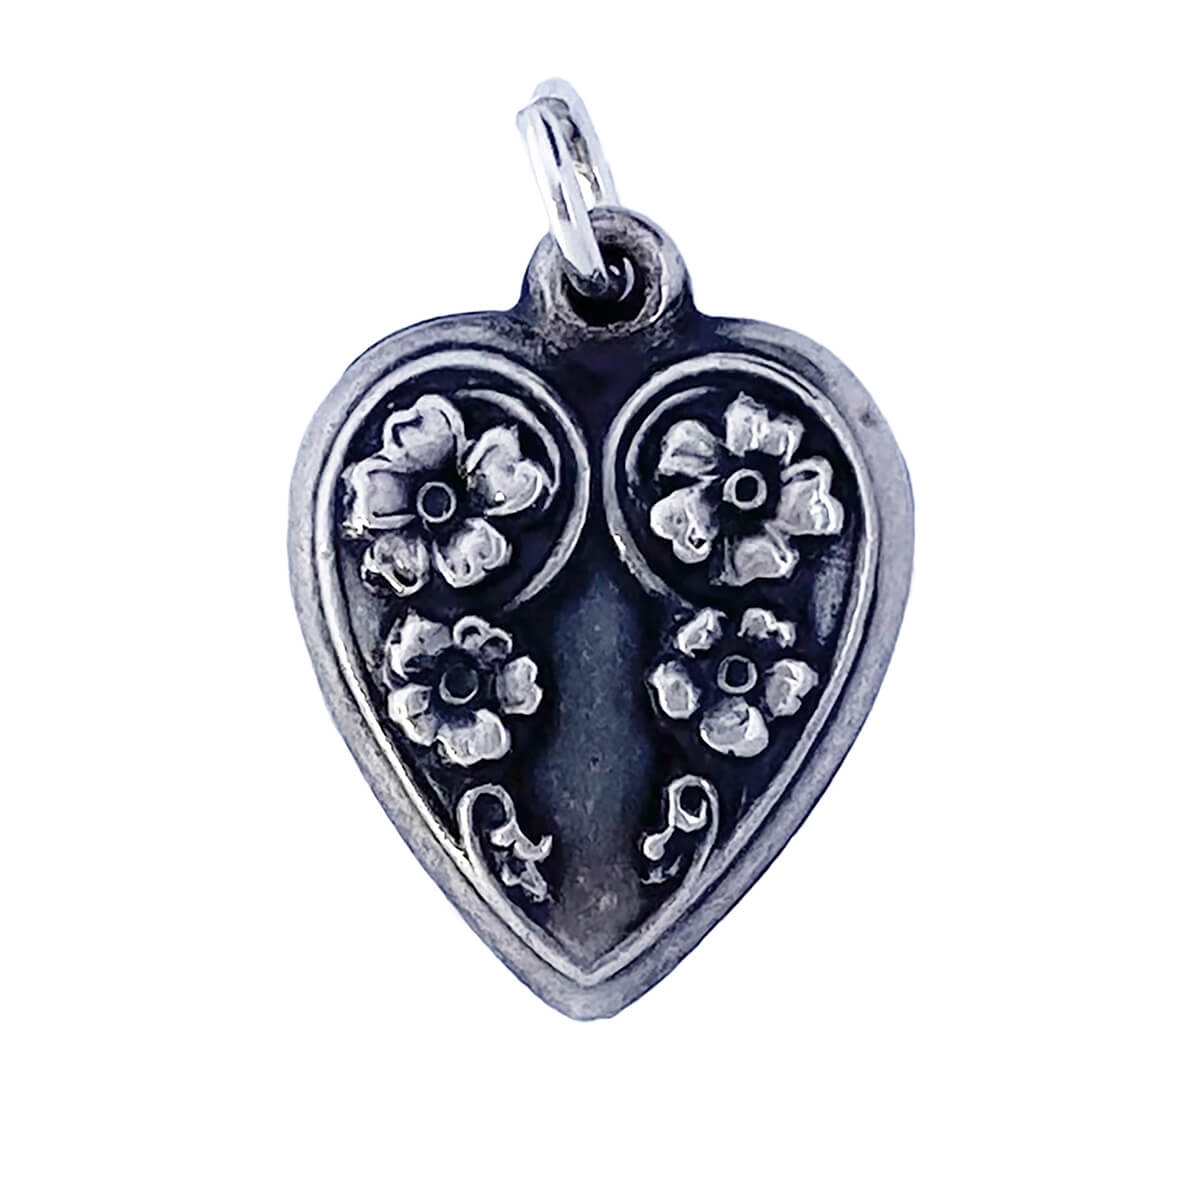 Vintage 1940s puffy heart with floral design charm sterling silver pendant from Charmarama